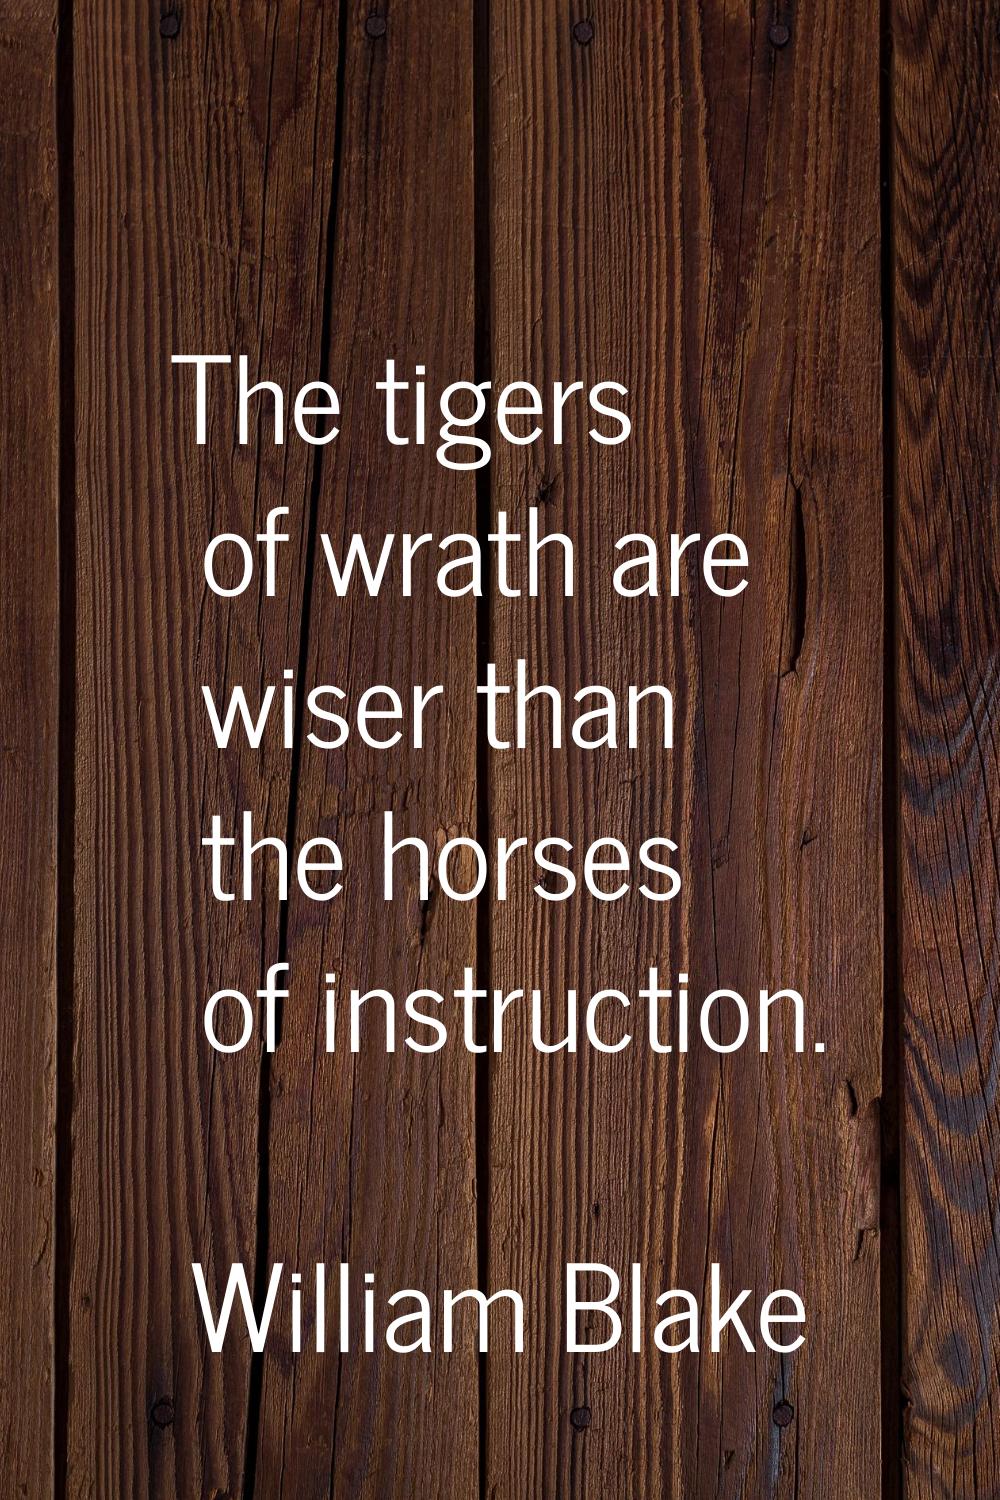 The tigers of wrath are wiser than the horses of instruction.